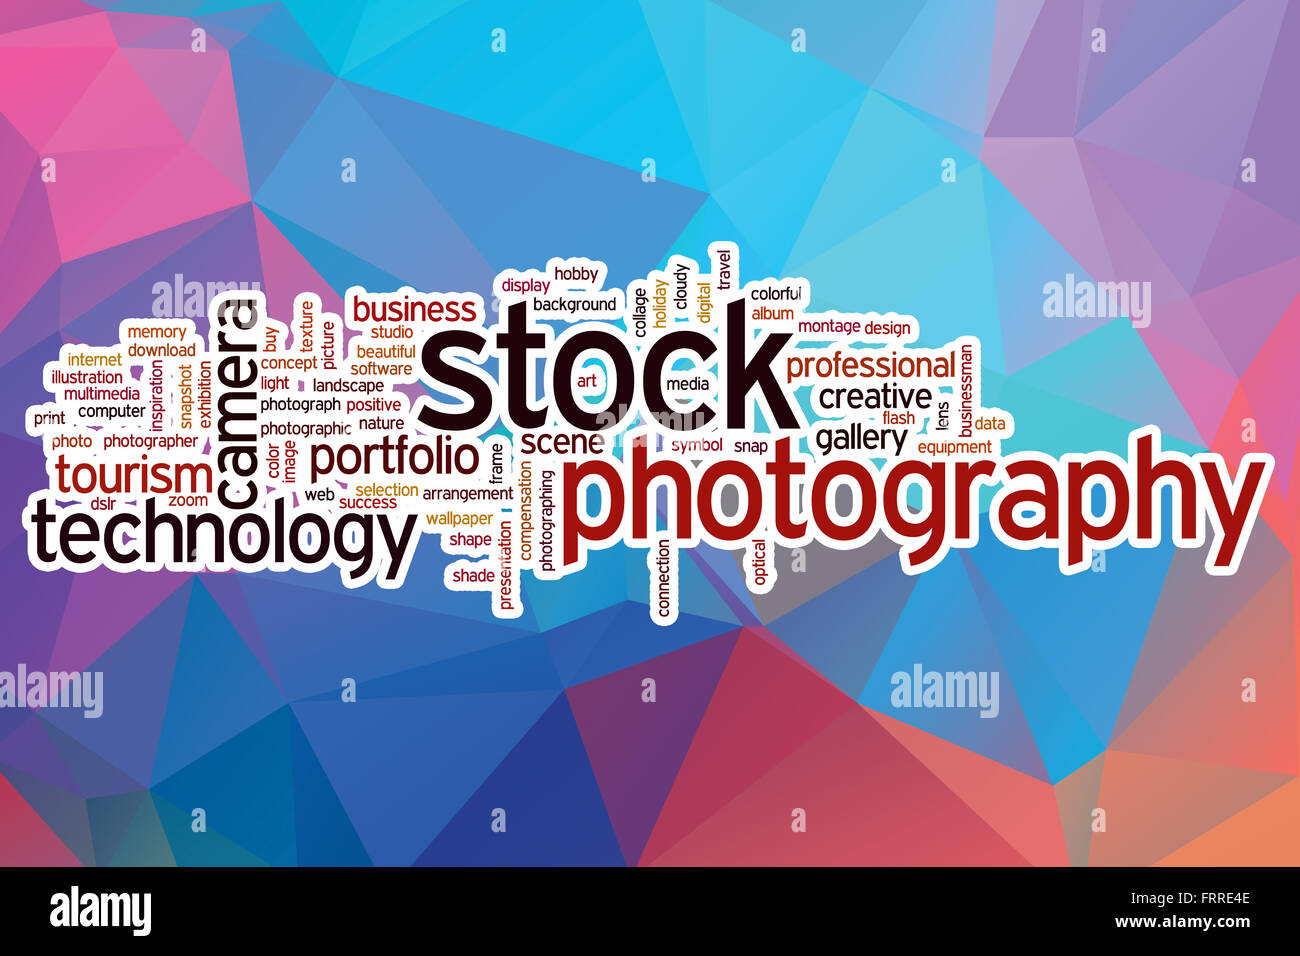 Stock photography word cloud concept with abstract background Stock Photo